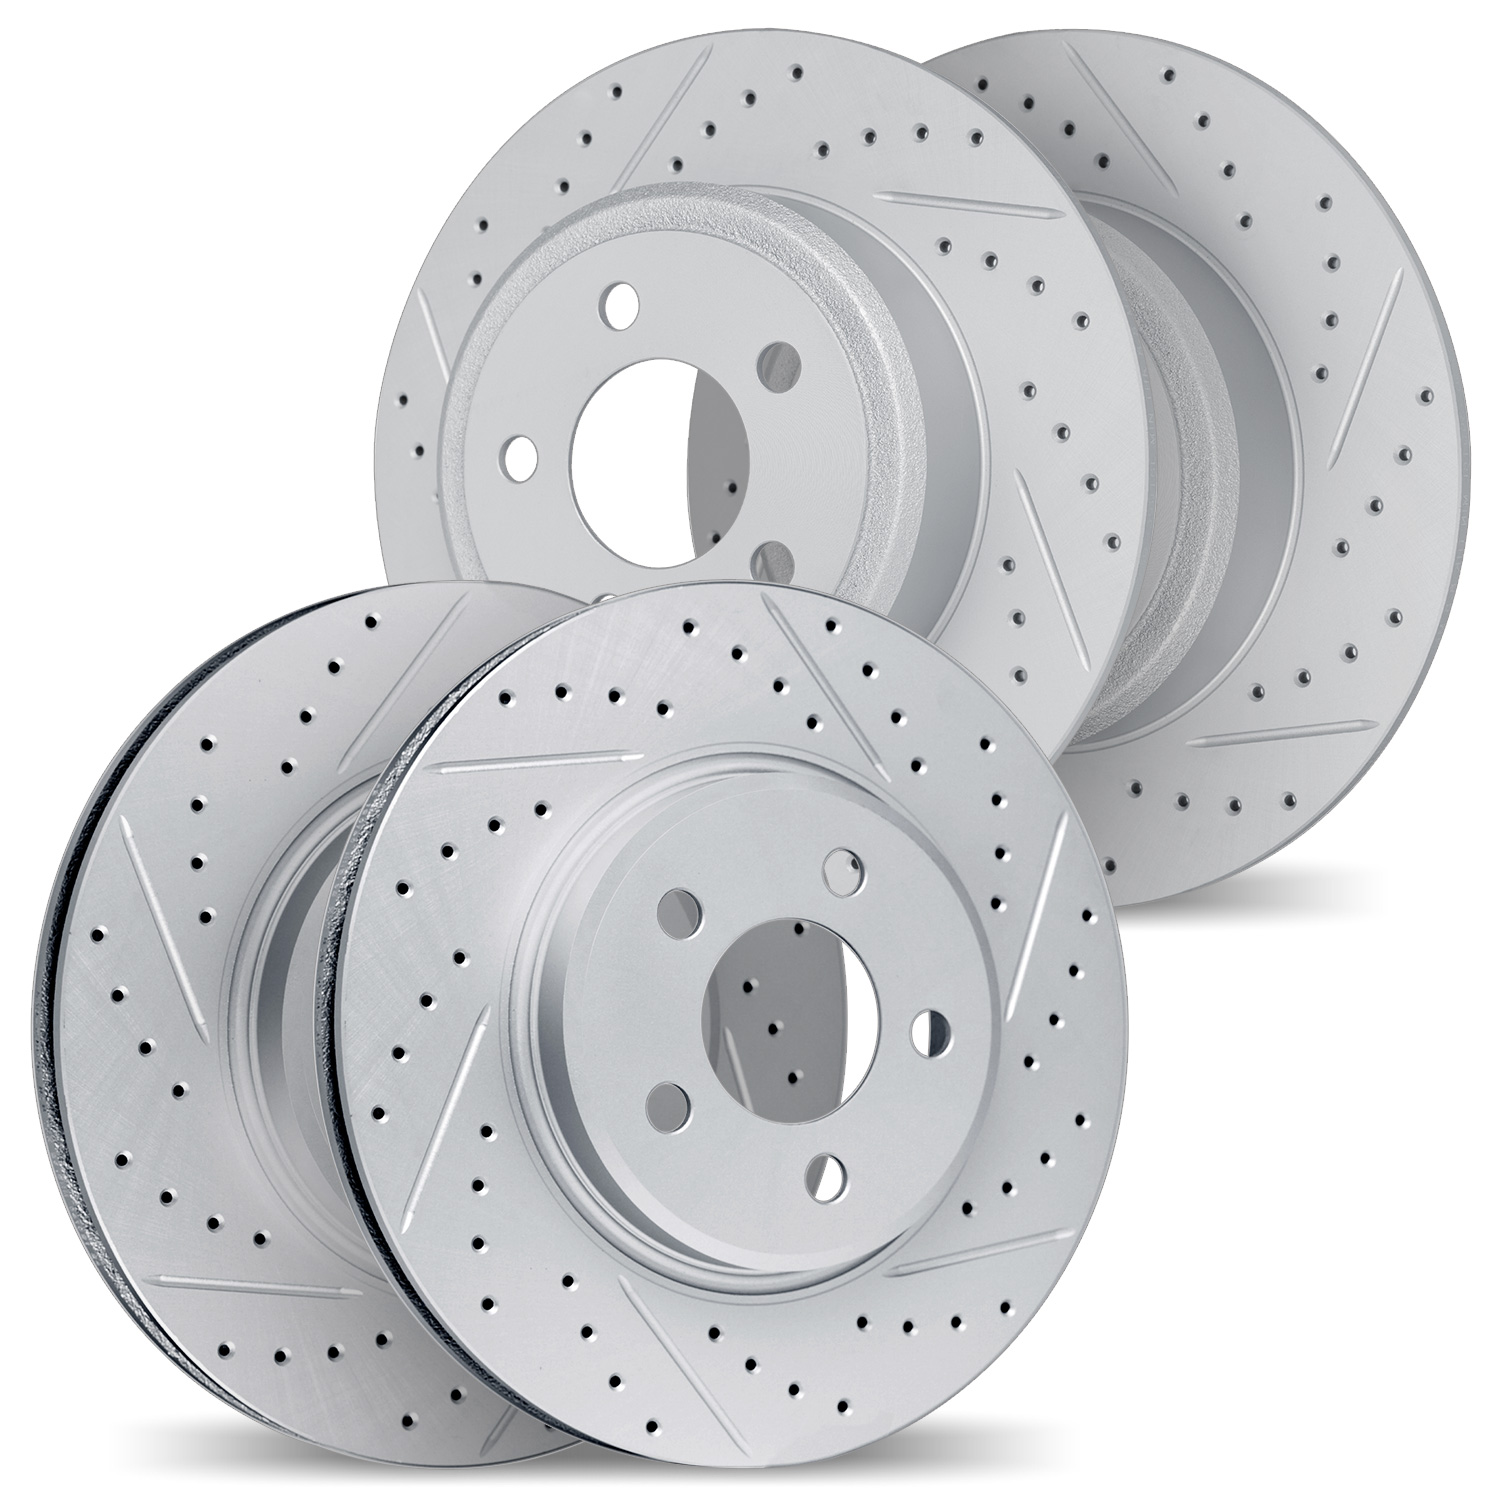 2004-74002 Geoperformance Drilled/Slotted Brake Rotors, 2006-2010 Audi/Volkswagen, Position: Front and Rear